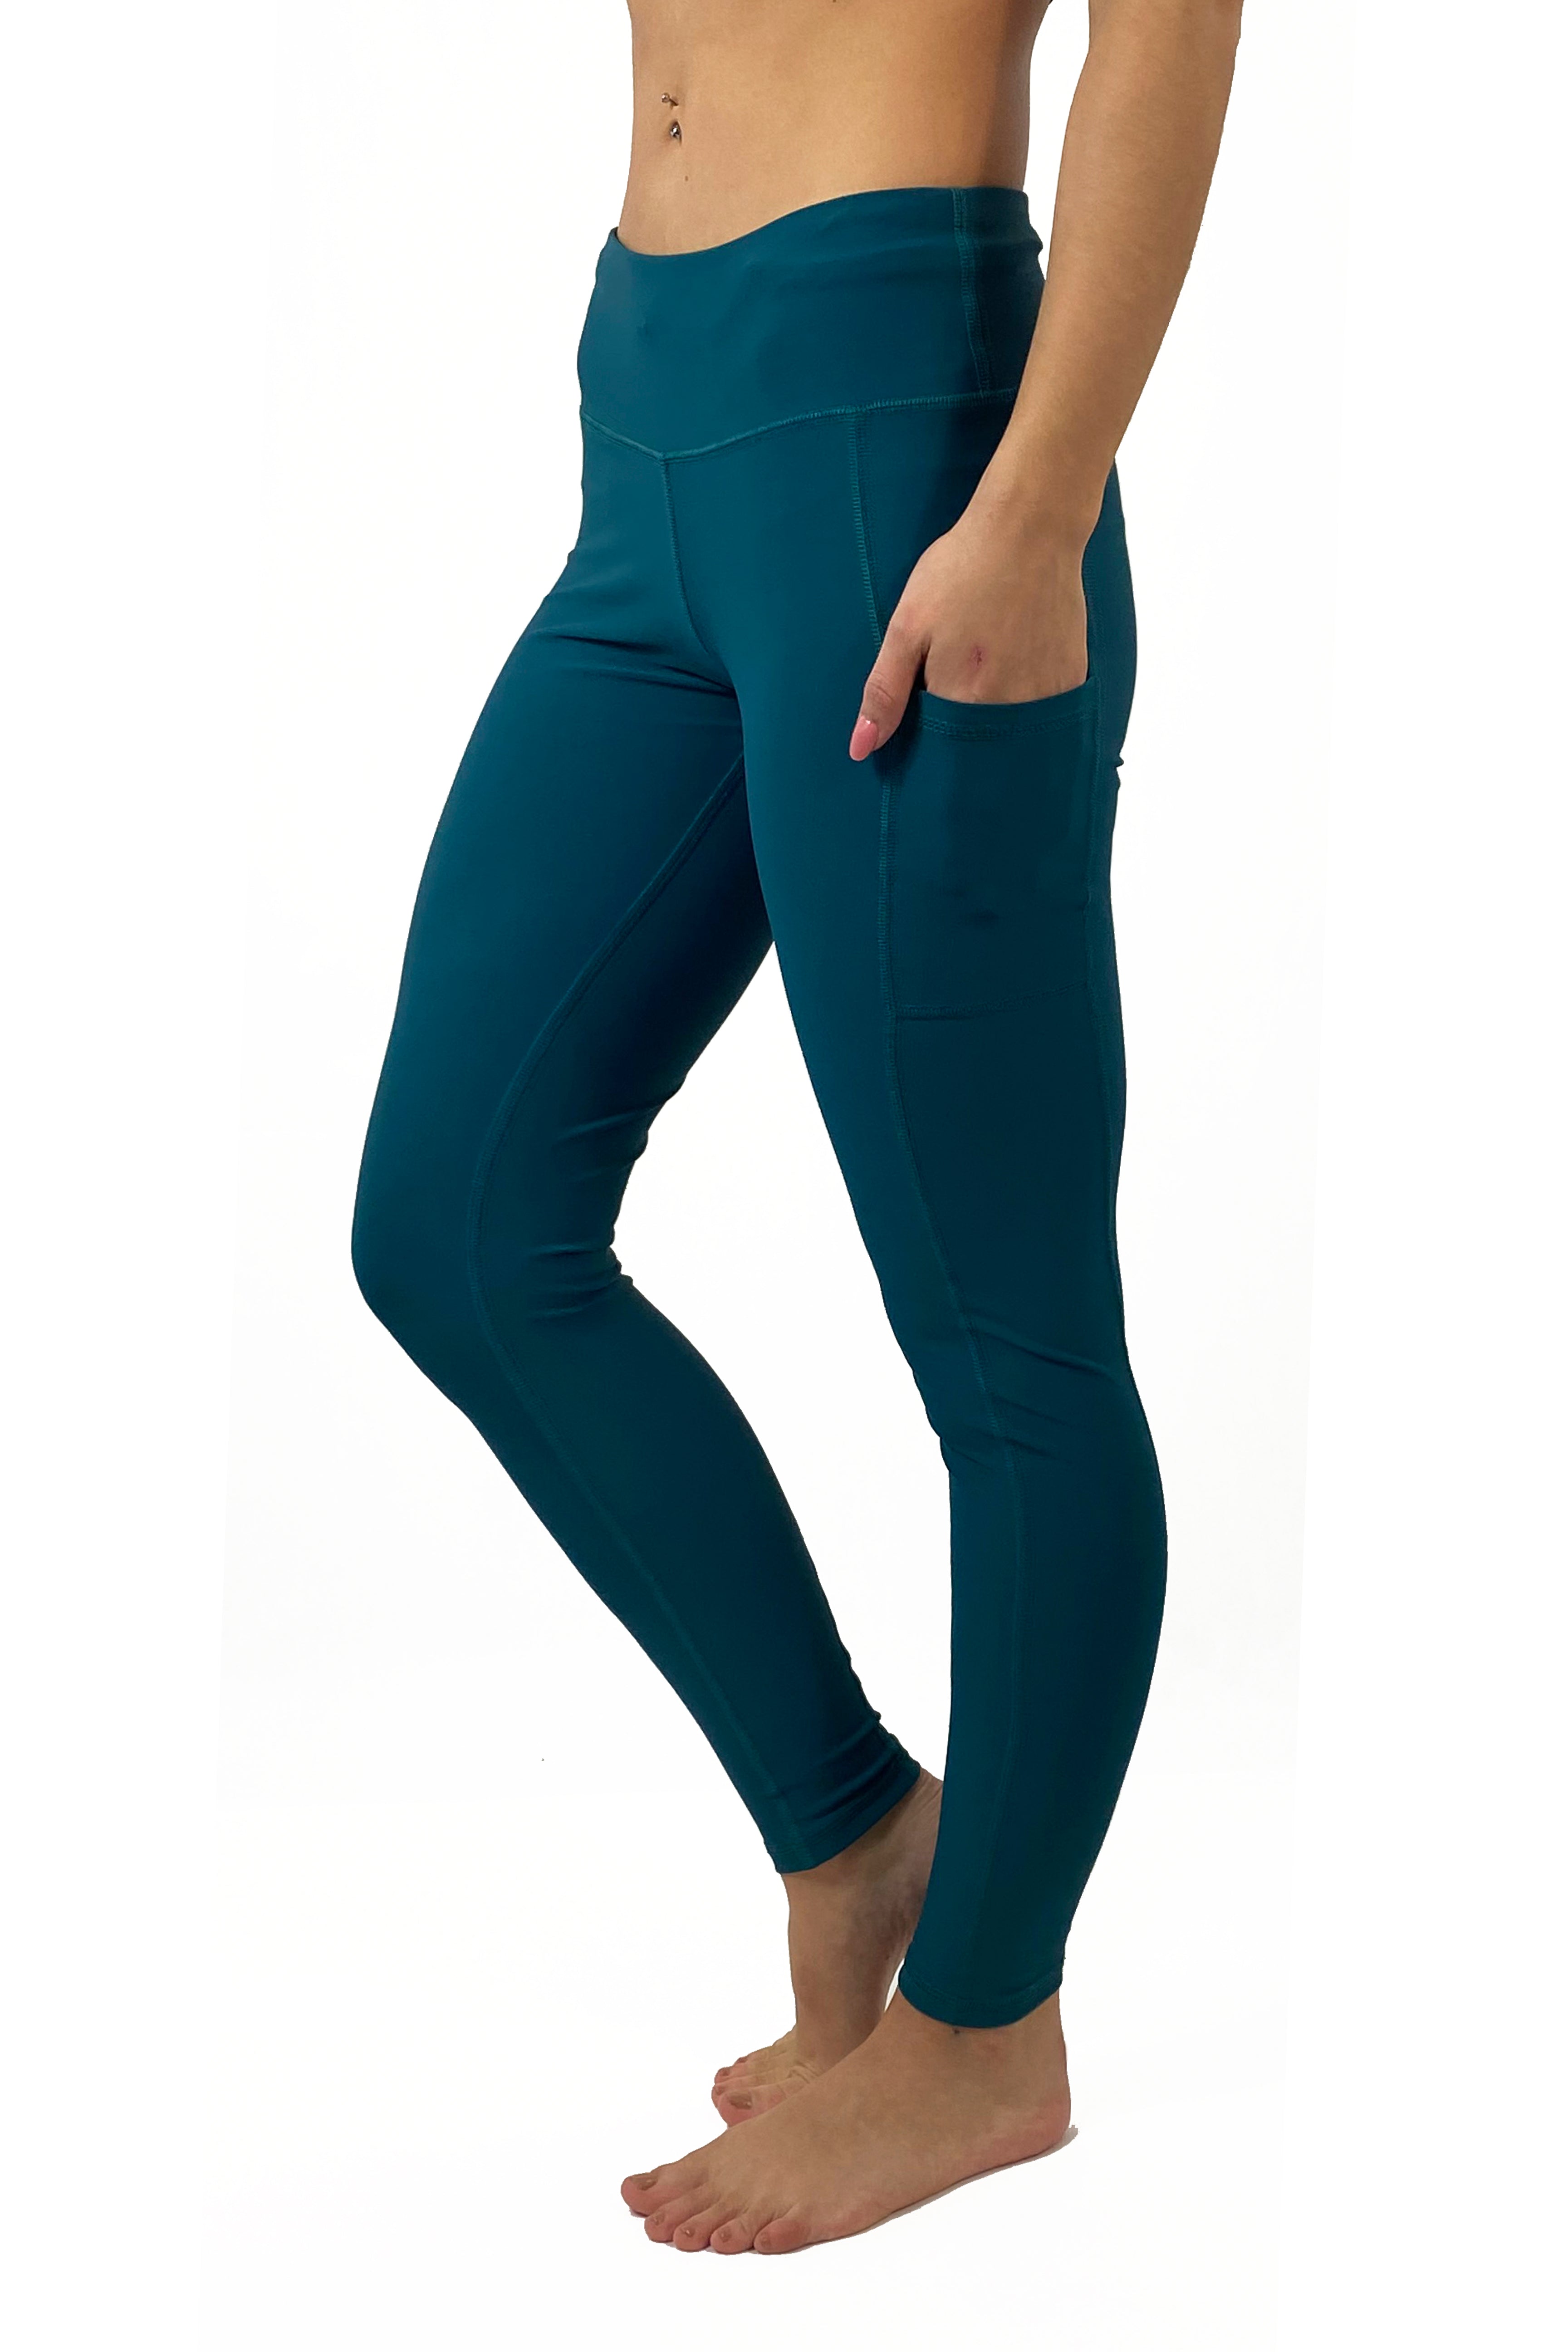 HC- The "Victory" Cell Phone Pocket Legging/ Emerald Green - FINAL SALE